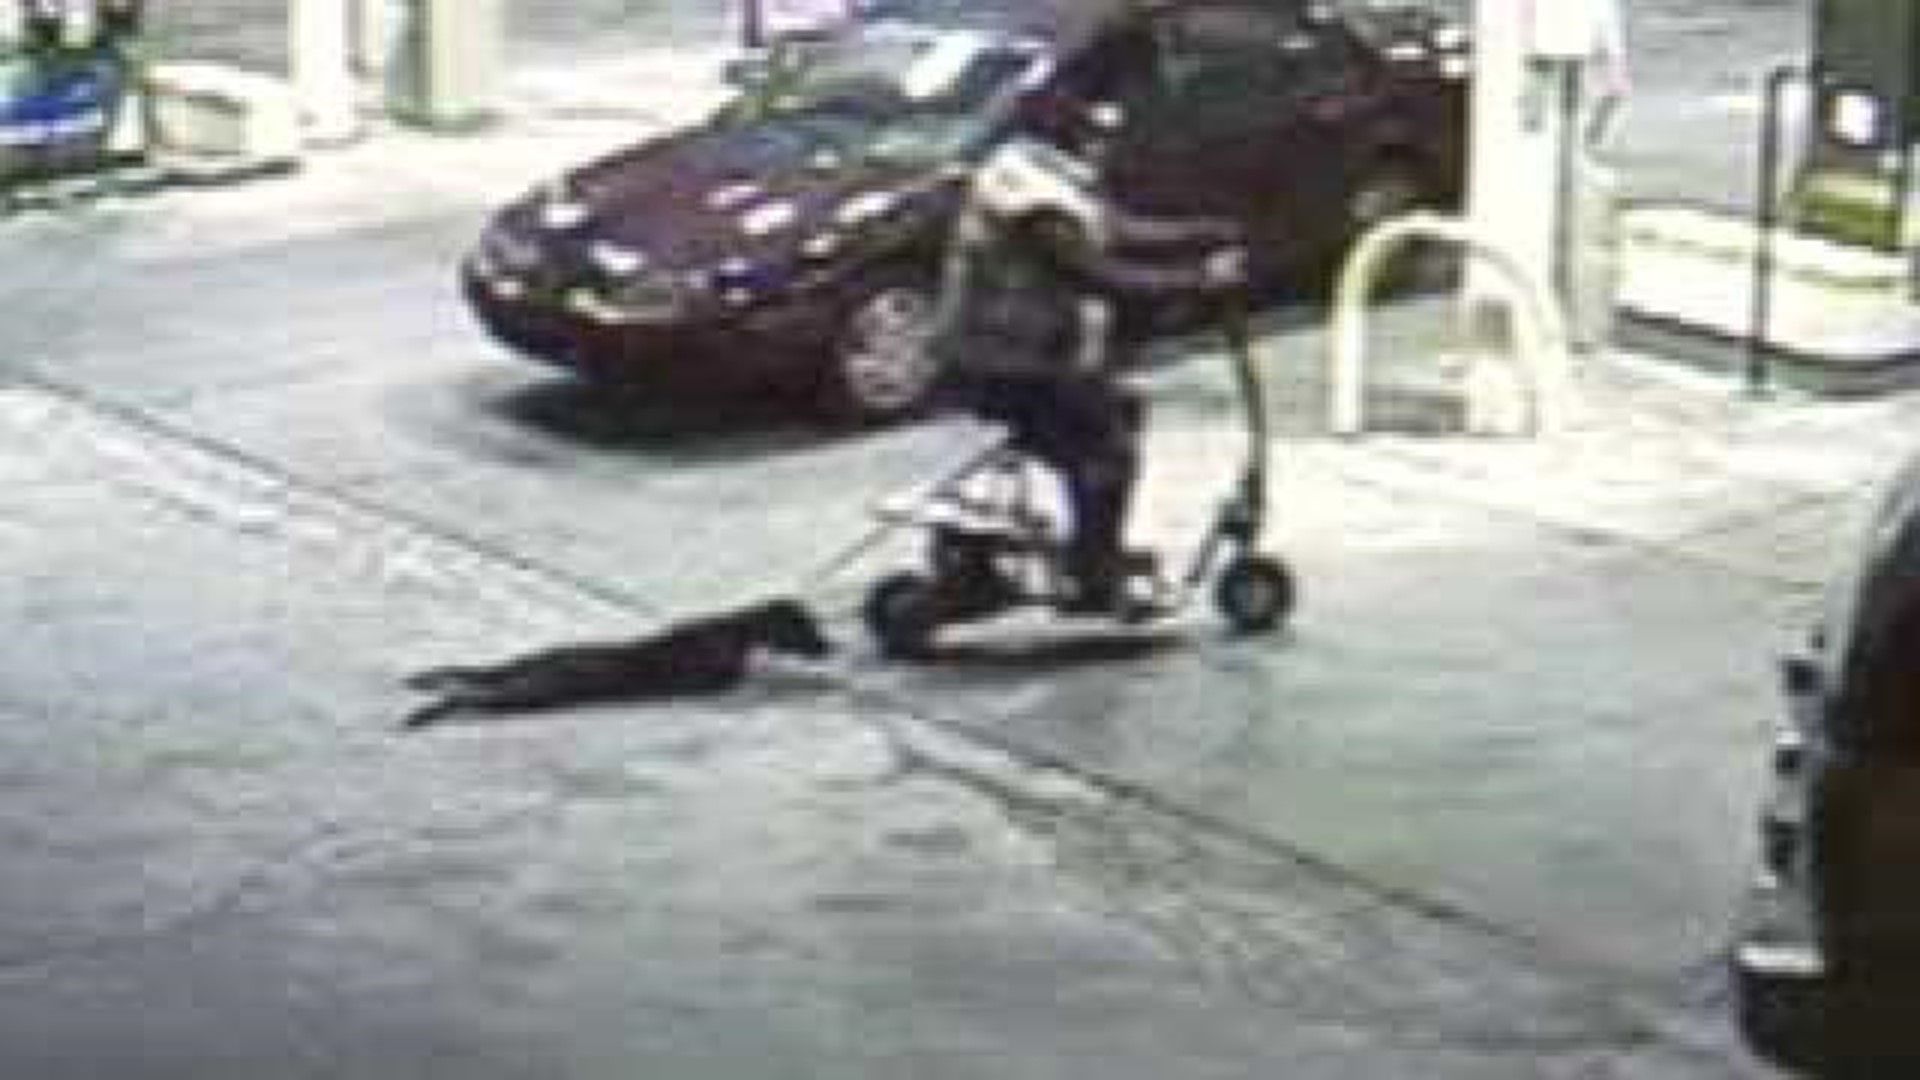 Man caught on tape dragging dog behind a scooter